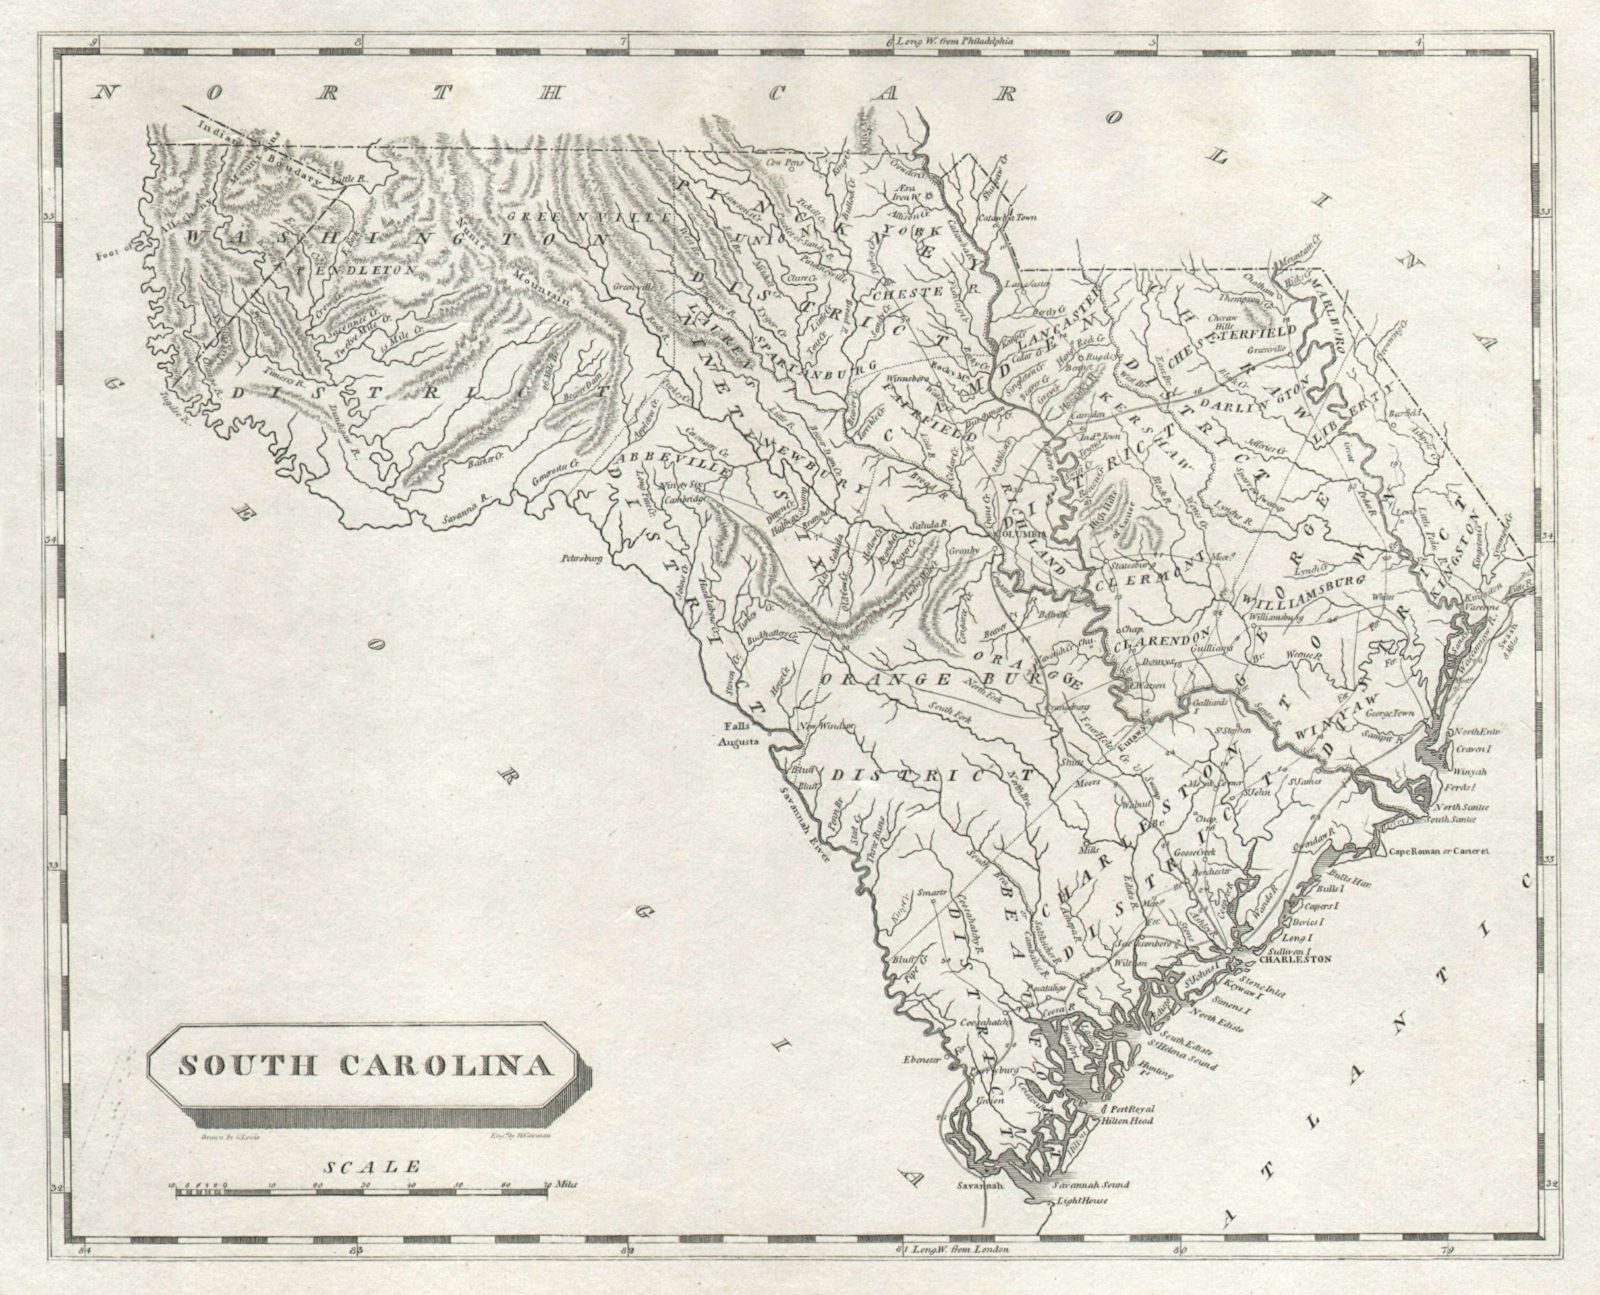 South Carolina state map by Arrowsmith & Lewis 1812 old antique plan chart